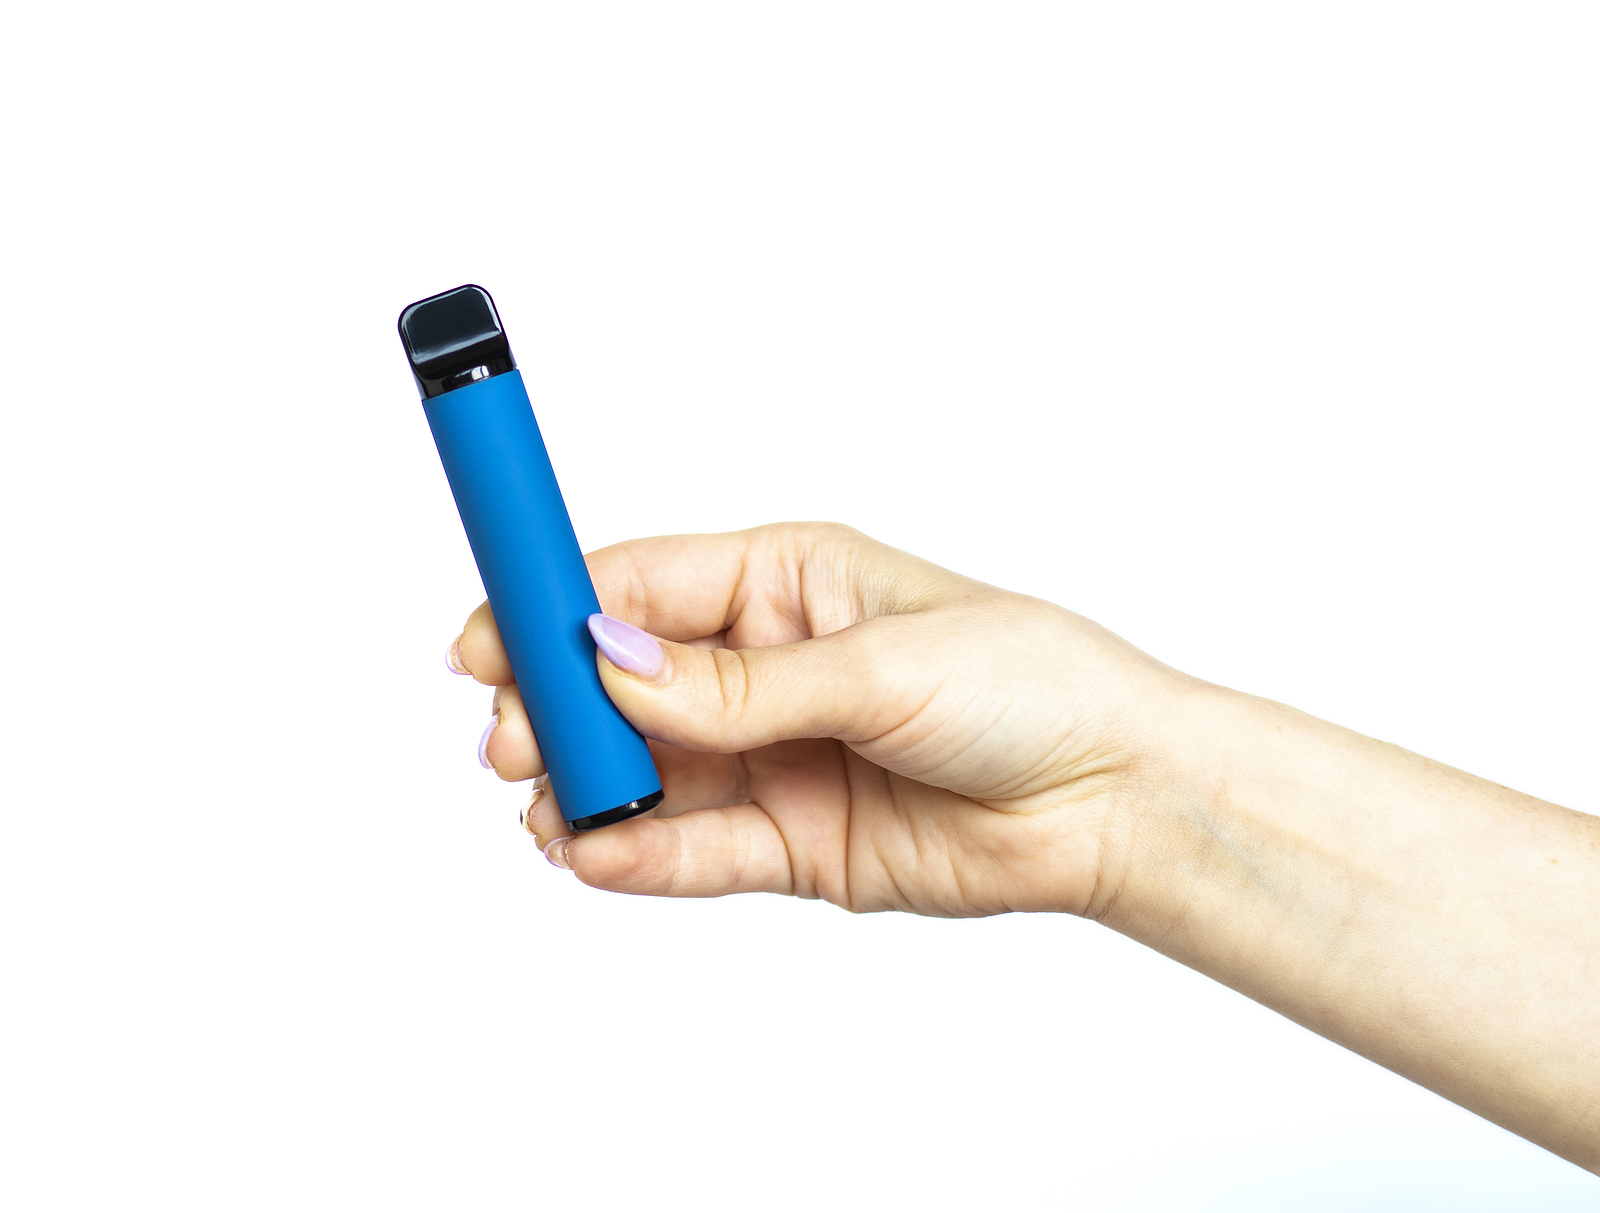 Disposable Electronic Cigarette. The Concept Of Modern Smoking,